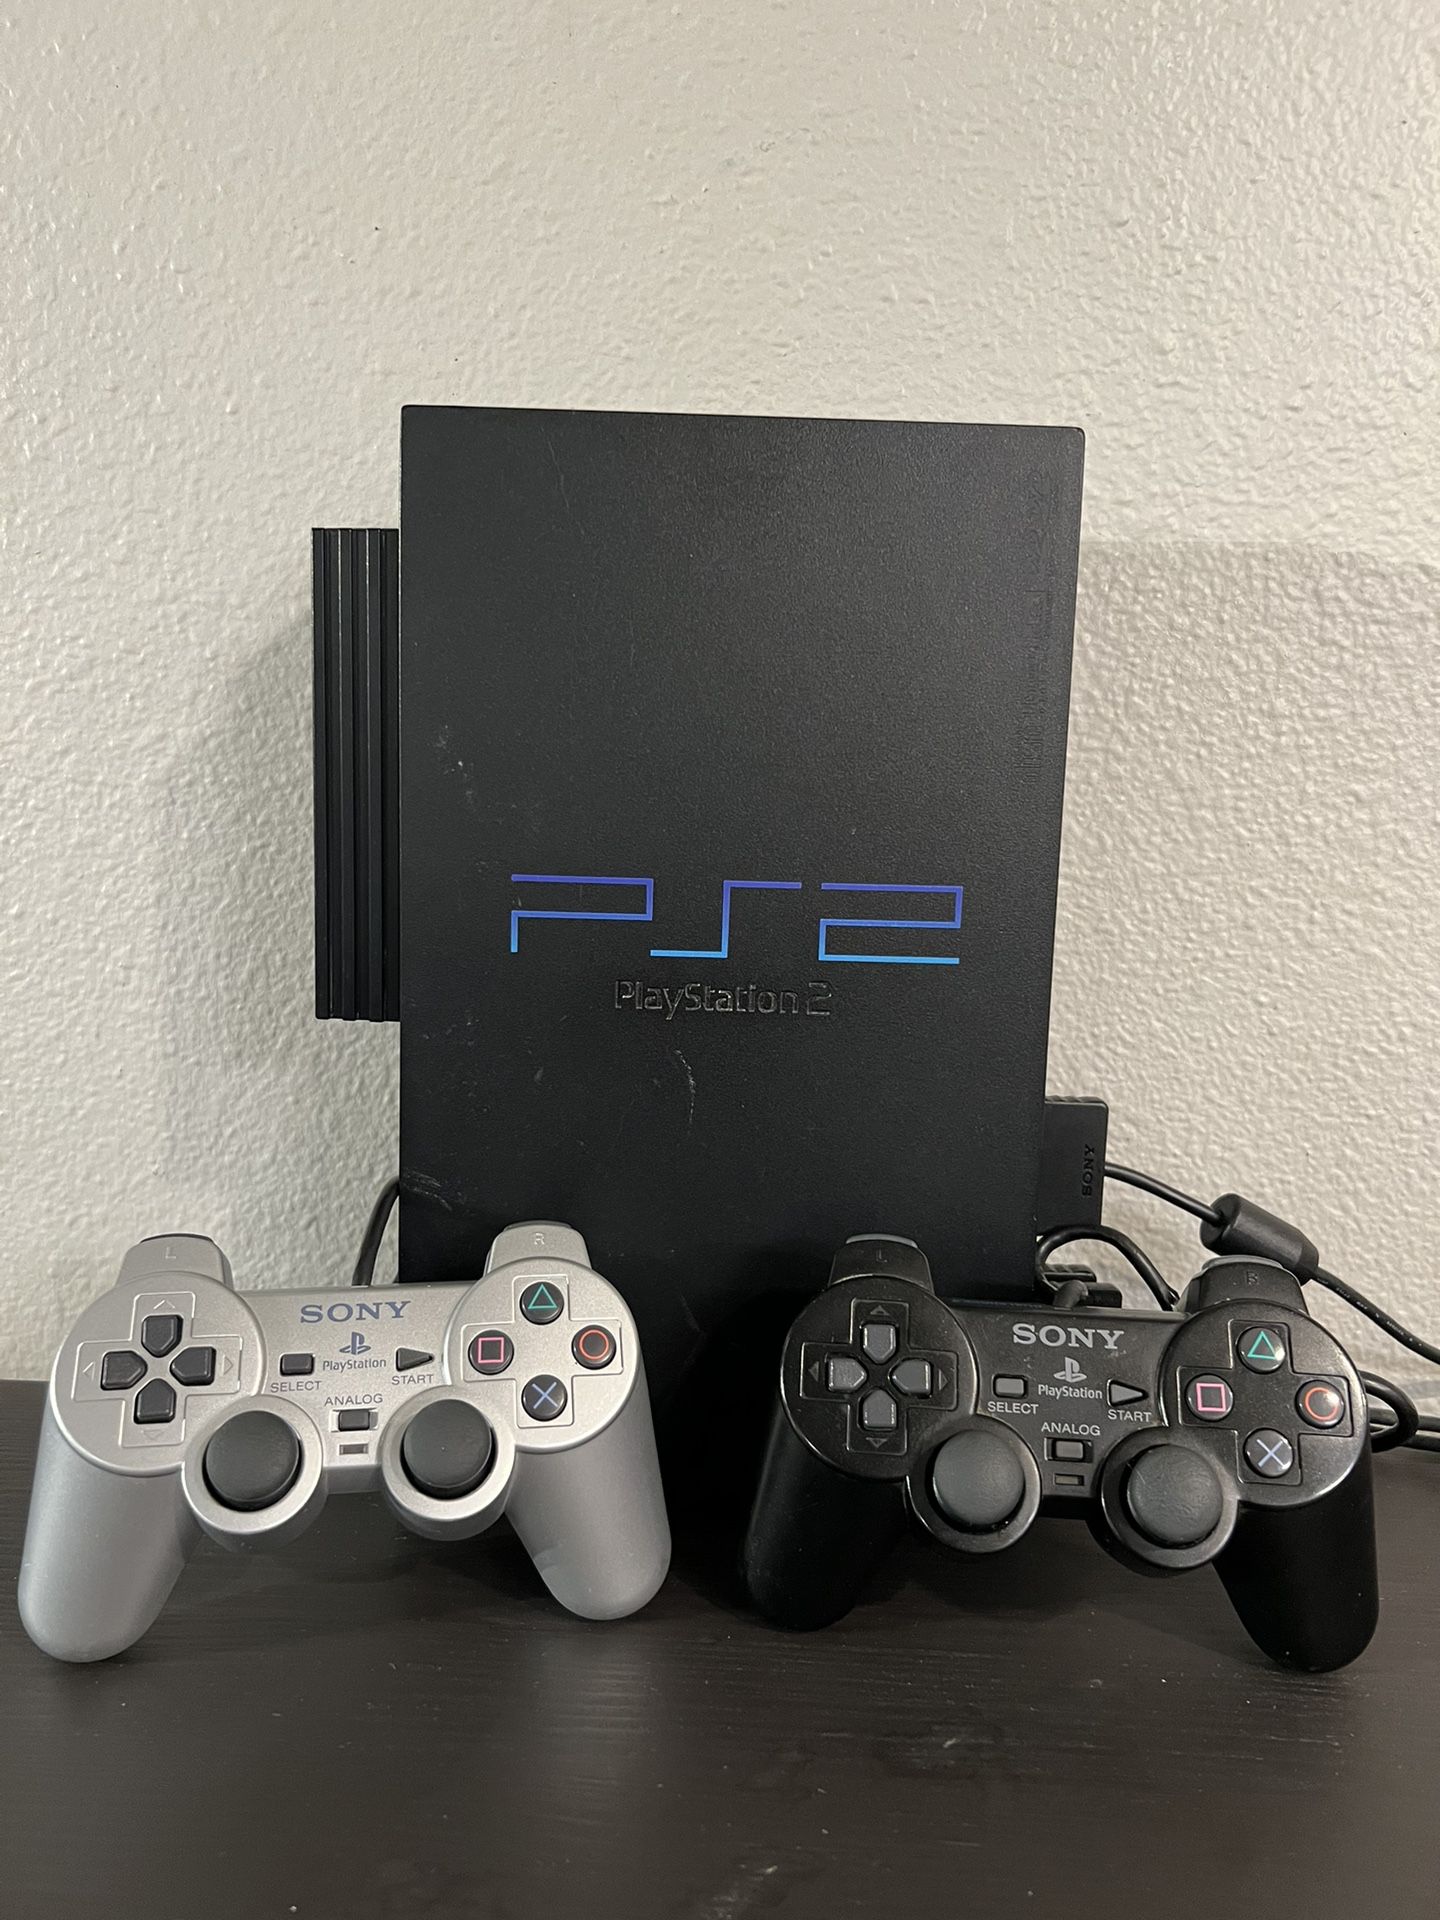 PS2, Network Adapter, Hard Drive, Two Controllers, DDRMAX2 And 8MB Memory Card